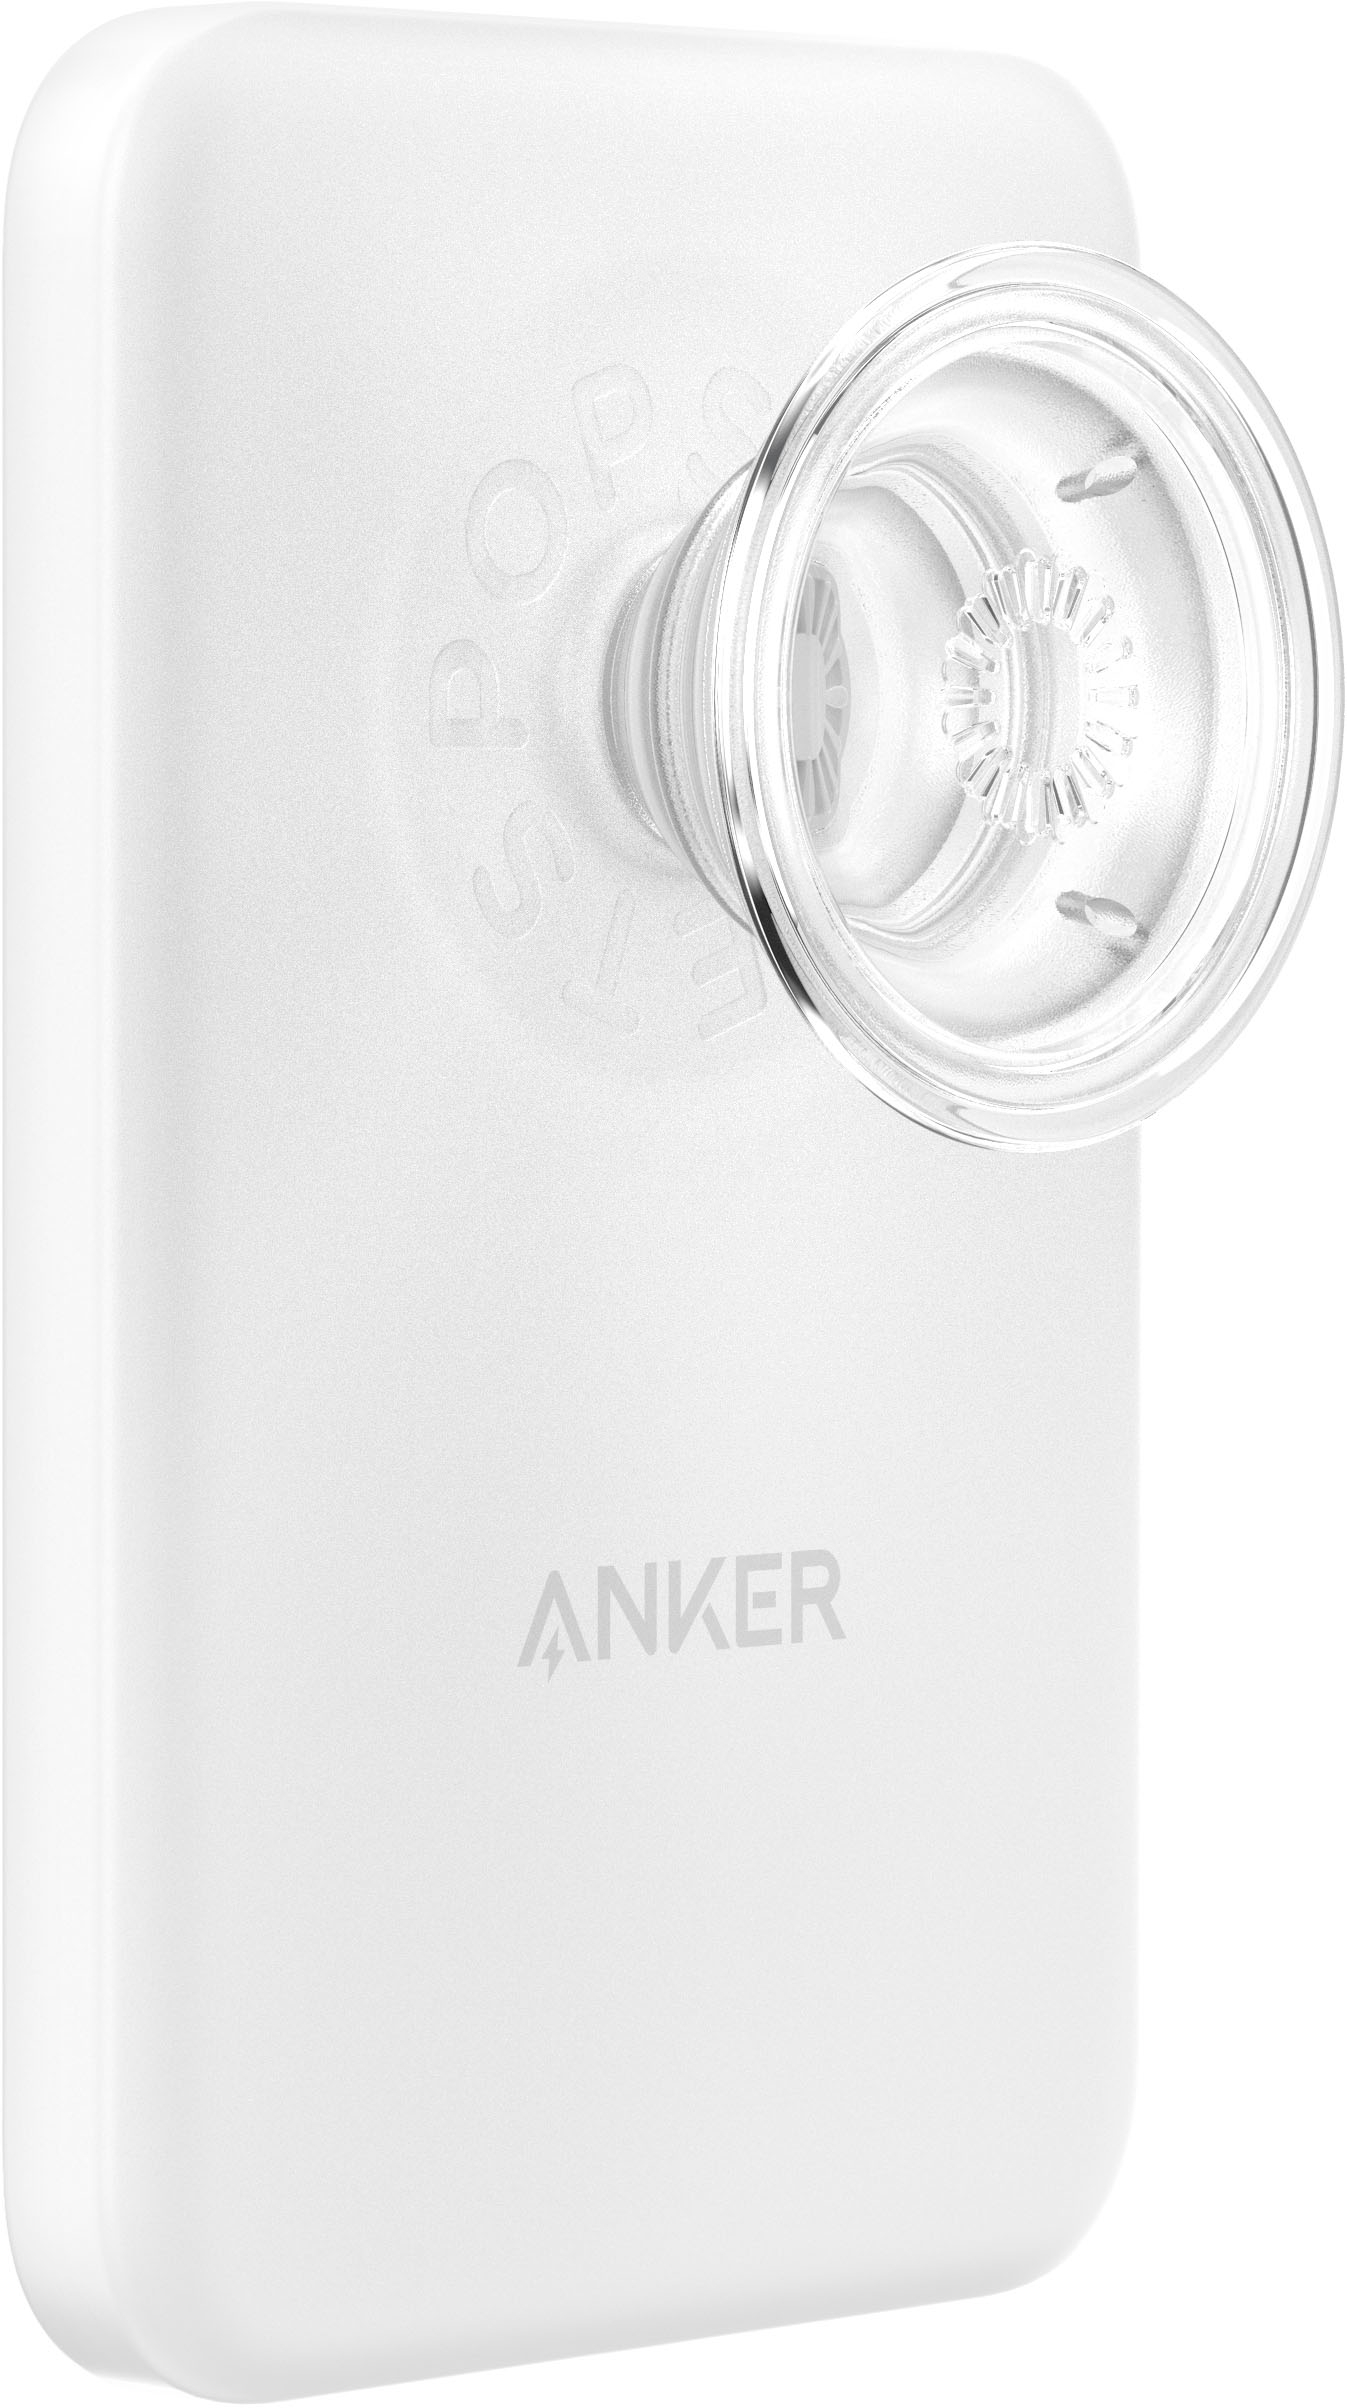 PopSockets x Anker MagGo 5,000 mAh Portable Magnetic Battery Charger with Grip for MagSafe White and Clear A1612H21 - Best Buy